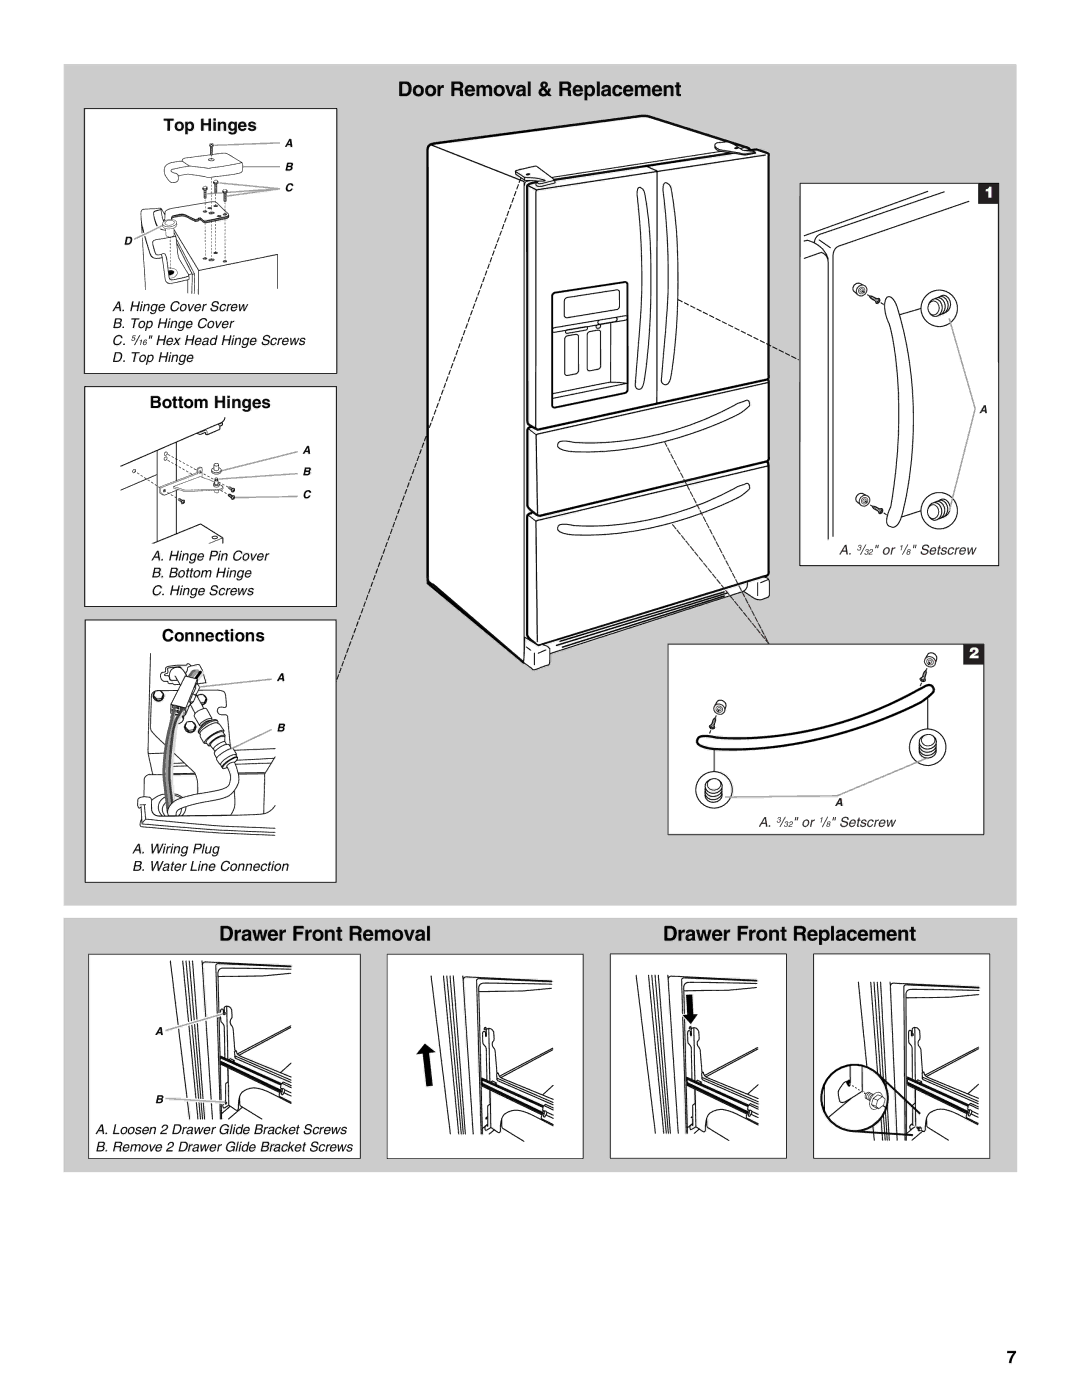 KitchenAid KFXS25RYWH installation instructions Drawer Front Replacement 